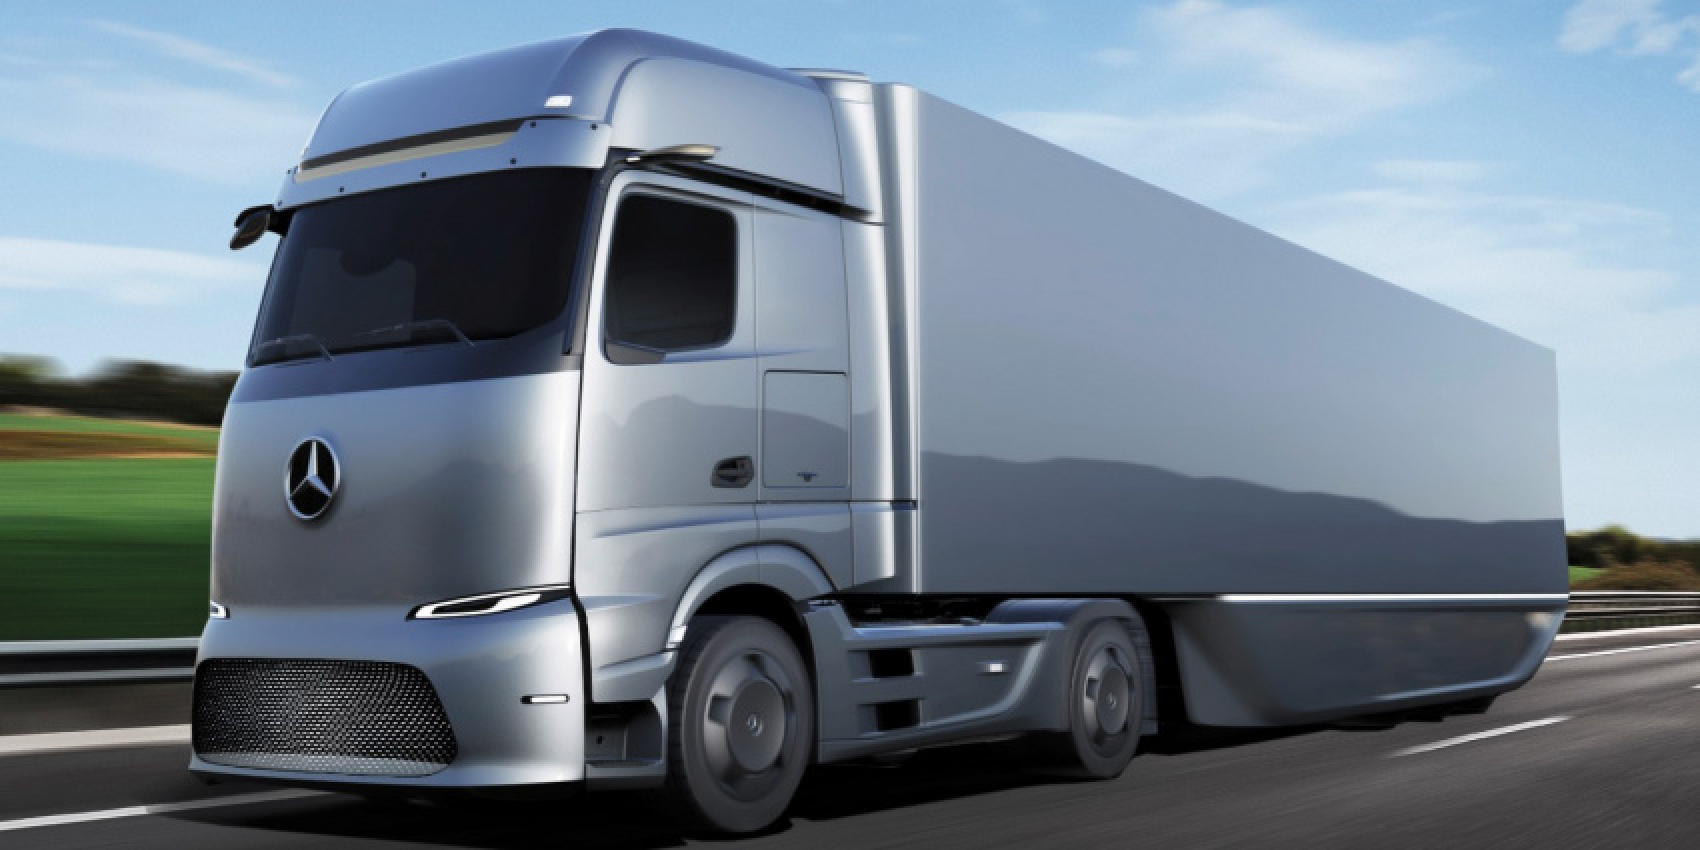 autos, battery & fuel cell, cars, electric vehicle, daimler, daimler trucks, electric trucks, fcev, fraunhofer, fuel cell truck, study, traton, fraunhofer study: hydrogen will not play a major role in road transport